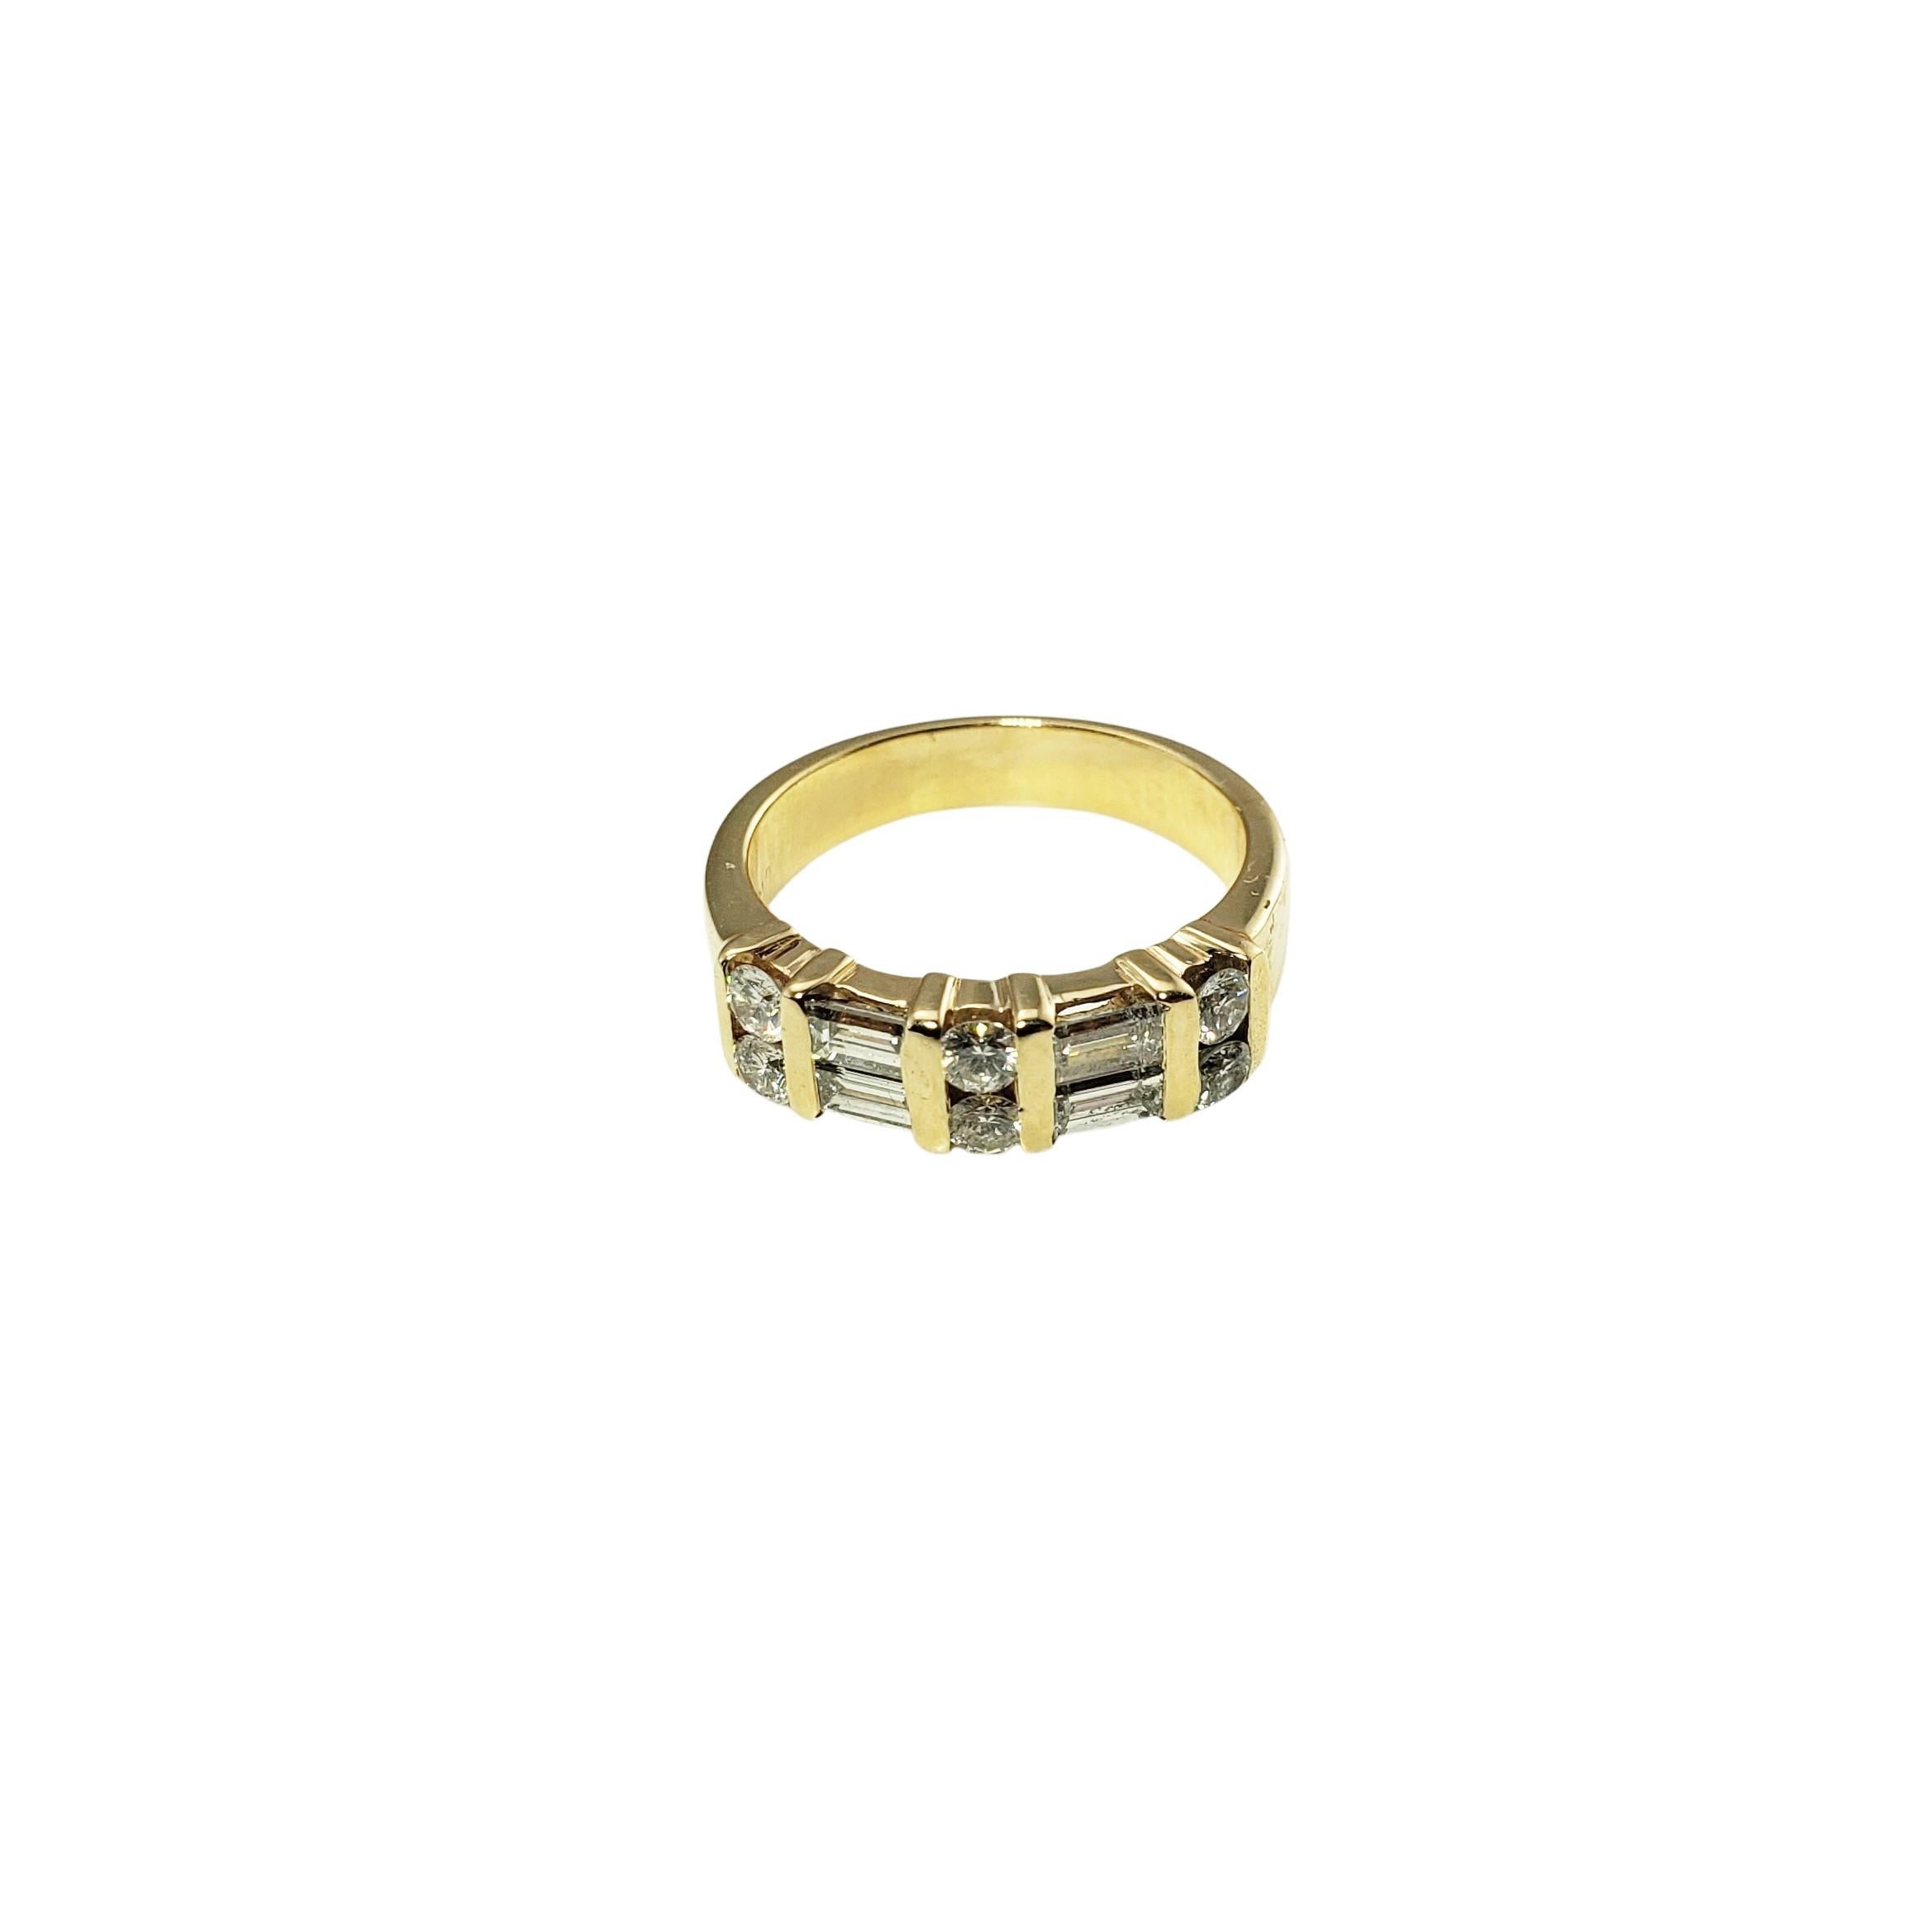 This sparkling ring features six round brilliant cut diamonds and four baguette diamonds set in classic 14K yellow gold.

Width:  5 mm.

Shank:  3 mm.

Approximate total diamond weight: .84  ct.

Diamond clarity: VS2

Diamond color:  G

Ring Size:  